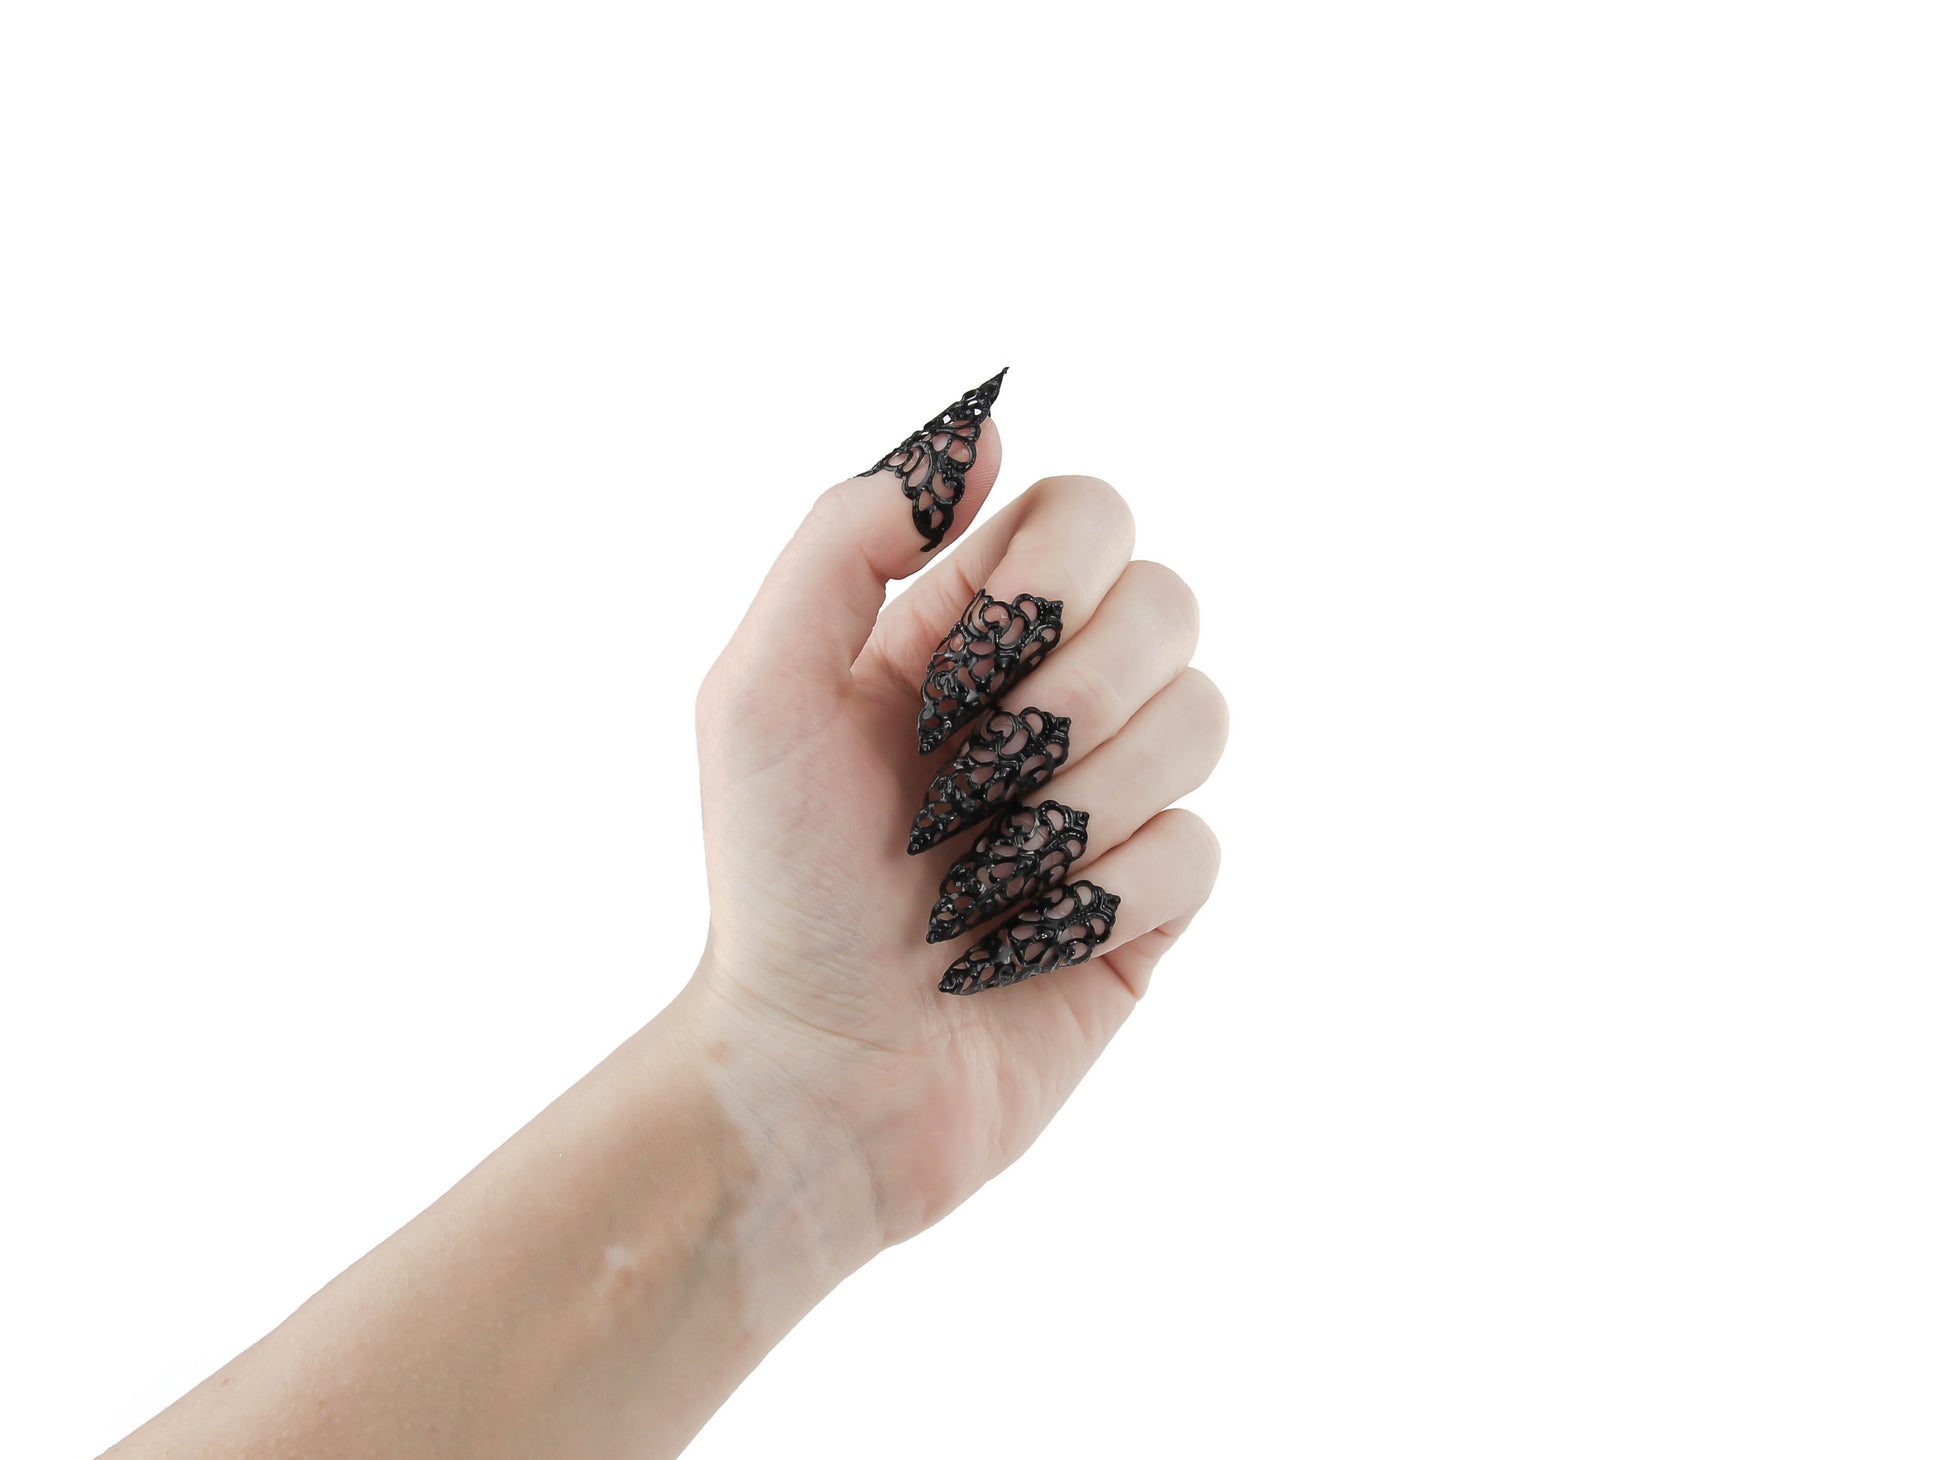 An image displays a hand adorned with Myril Jewels' gothic black nail jewels, exuding a neo-goth aesthetic with their claw-like design. These intricate black claws are perfect for Halloween, embodying punk and whimsigoth styles, and serve as bold jewelry for everyday wear or special events like raves and festivals. They are an ideal gift for the goth girlfriend who cherishes dark, alternative fashion.